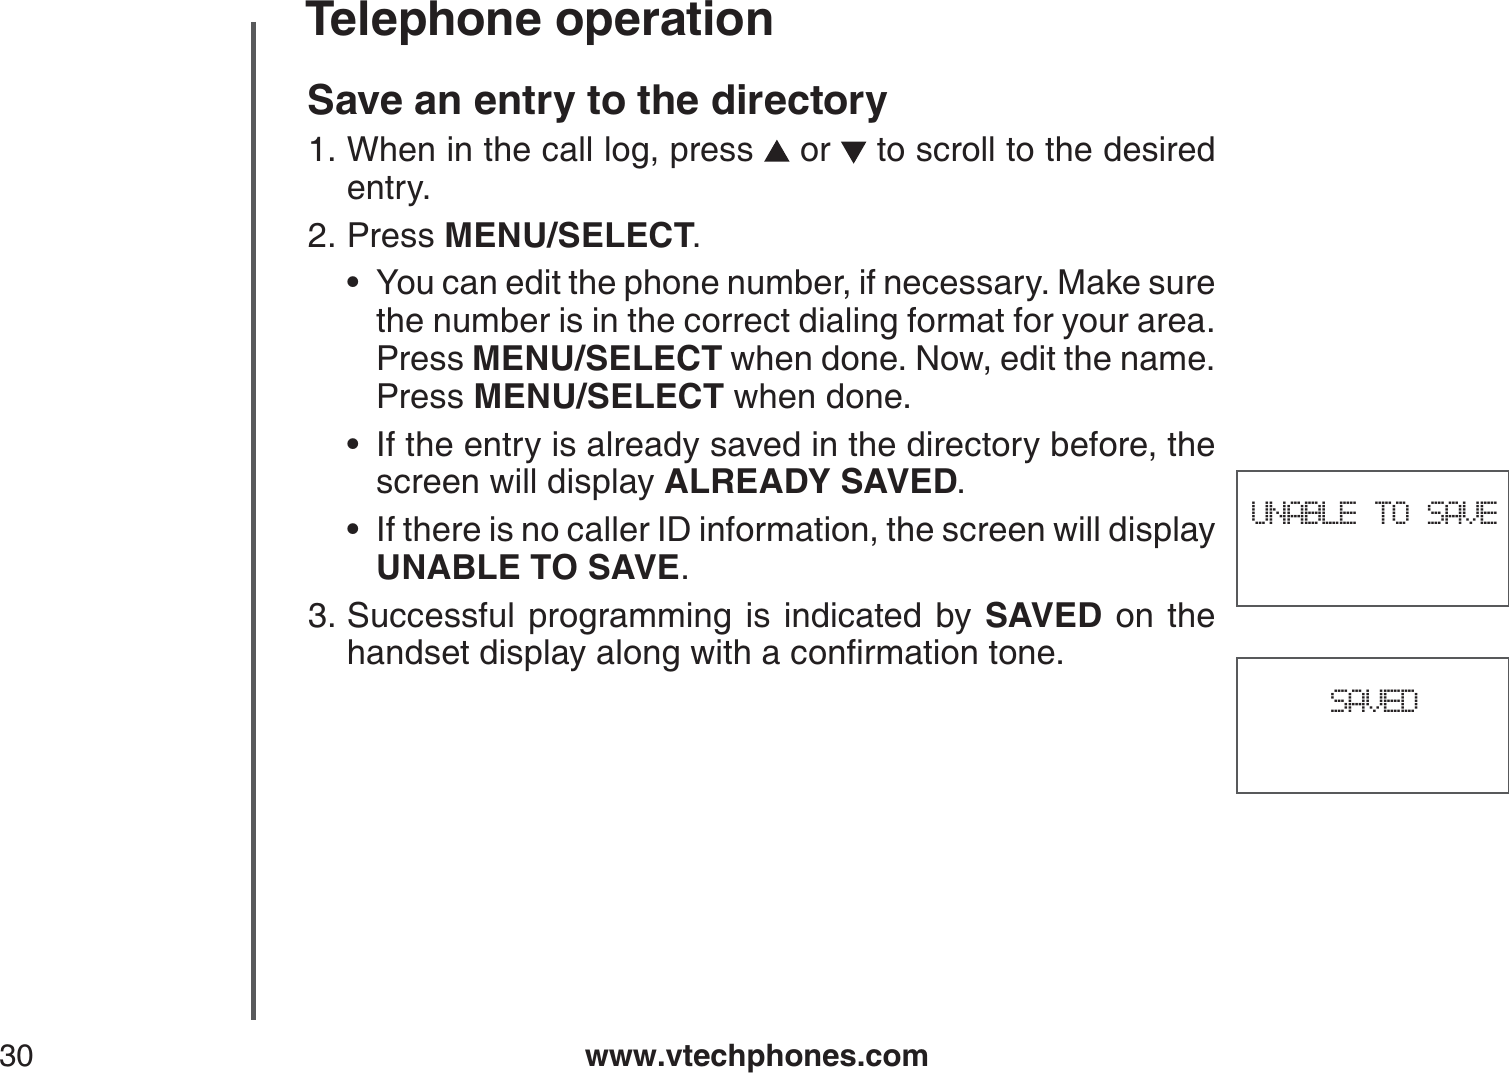 www.vtechphones.com30Telephone operationSave an entry to the directoryWhen in the call log, press   or   to scroll to the desired entry.Press MENU/SELECT.You can edit the phone number, if necessary. Make sure the number is in the correct dialing format for your area. Press MENU/SELECT when done. Now, edit the name. Press MENU/SELECT when done.If the entry is already saved in the directory before, the screen will display ALREADY SAVED.If there is no caller ID information, the screen will display UNABLE TO SAVE.Successful programming is indicated by SAVED on the JCPFUGVFKURNC[CNQPIYKVJCEQPſTOCVKQPVQPG1.2.•••3.SAVEDUNABLE TO SAVE